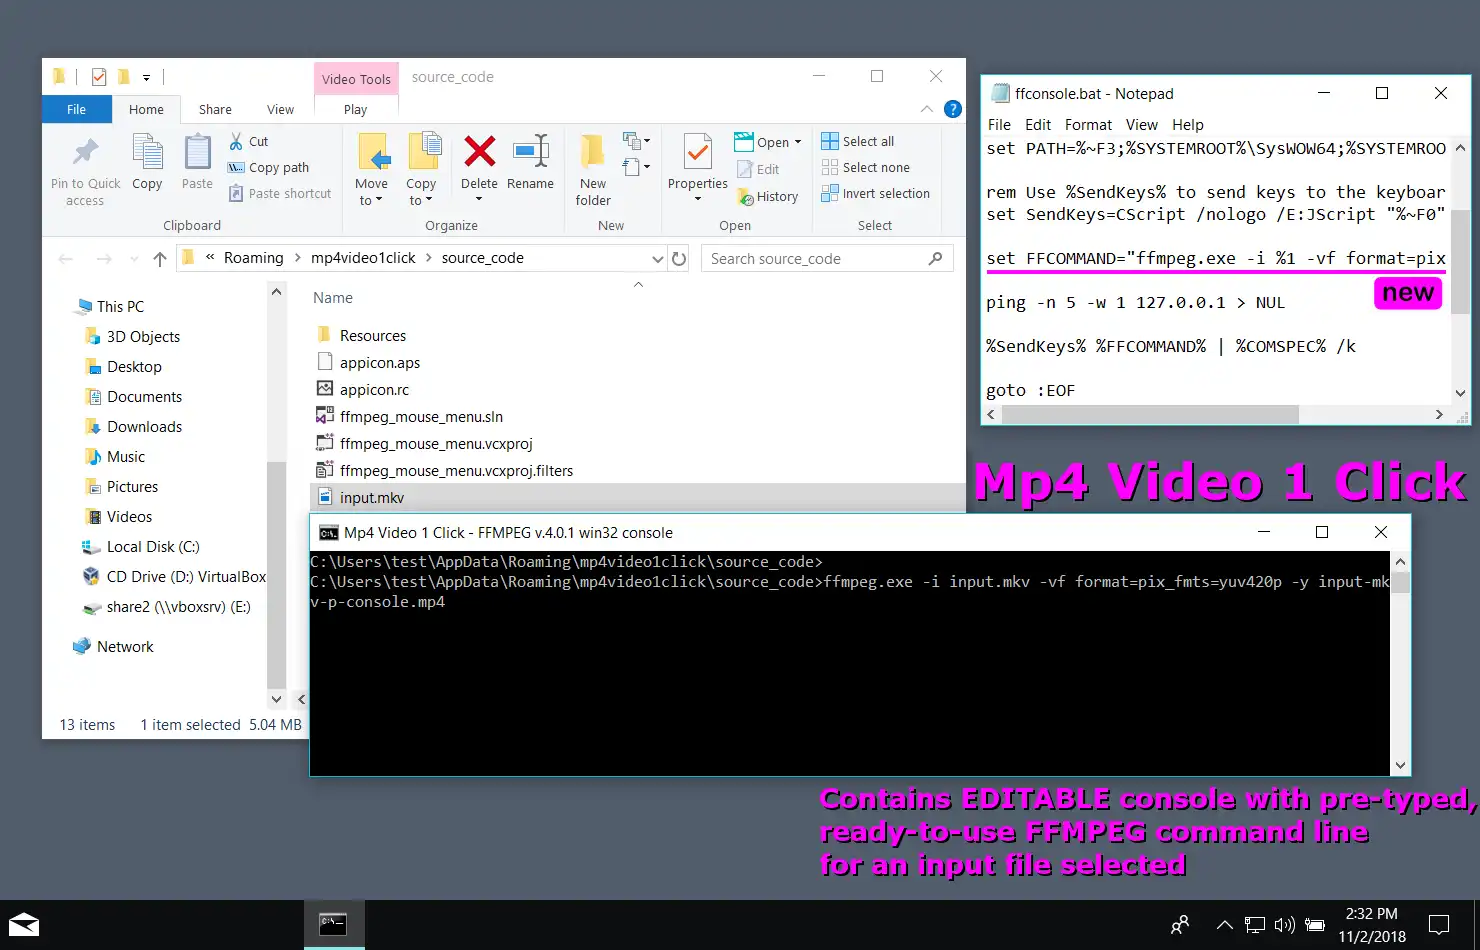 Download web tool or web app Mp4 Video 1 Click FFMPEG for Windows